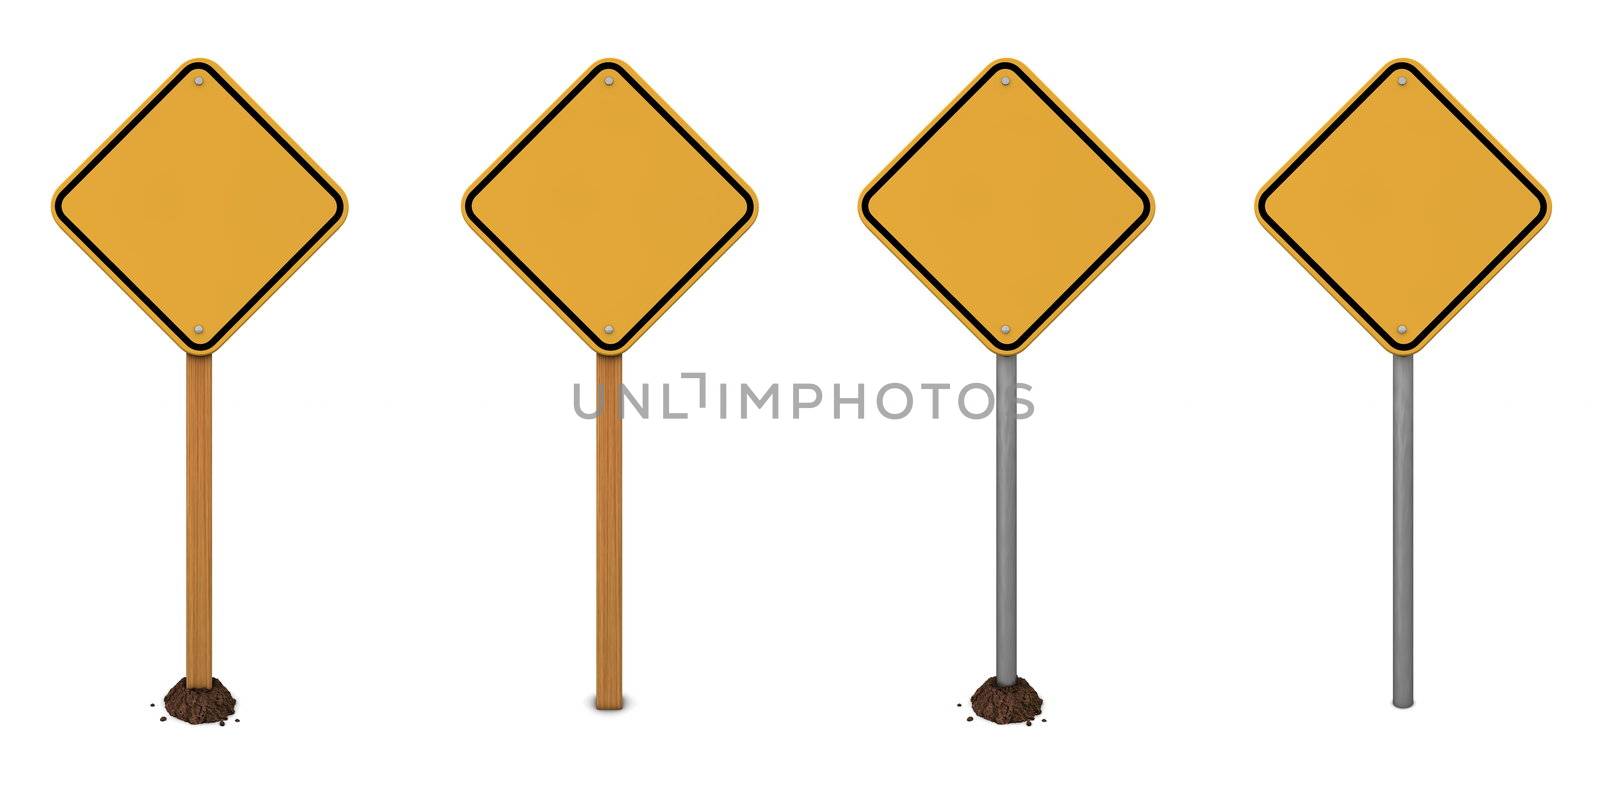 quadrangular dark yellow warning sign with four different posts - wood and metal - with, without mound of earth